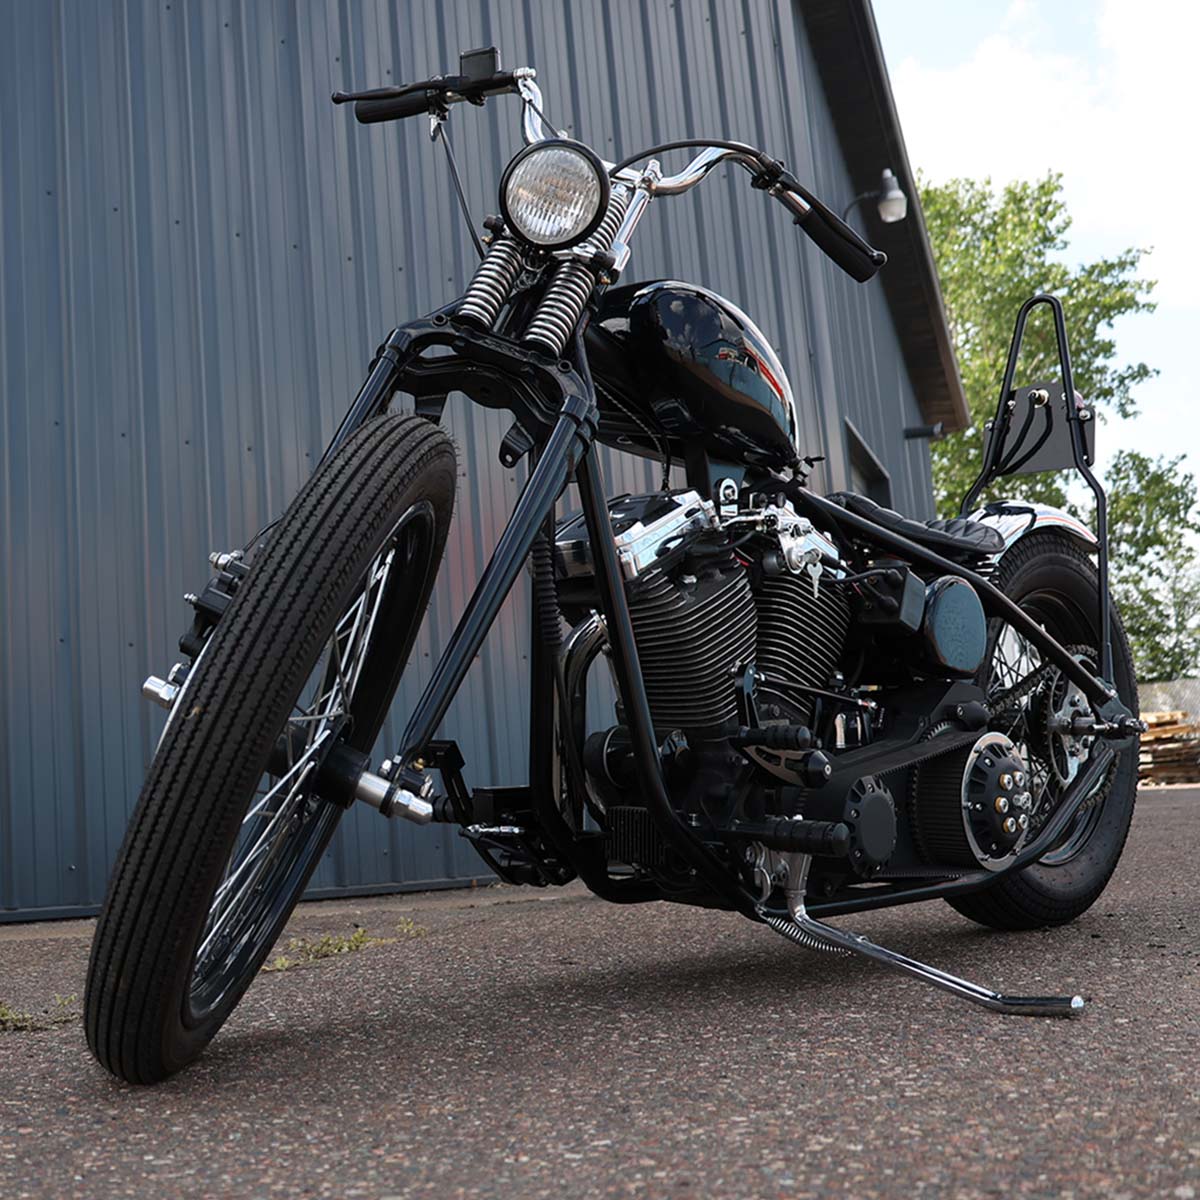 Everything you need to know about installing a Springer on a Harley-Davidson chopper